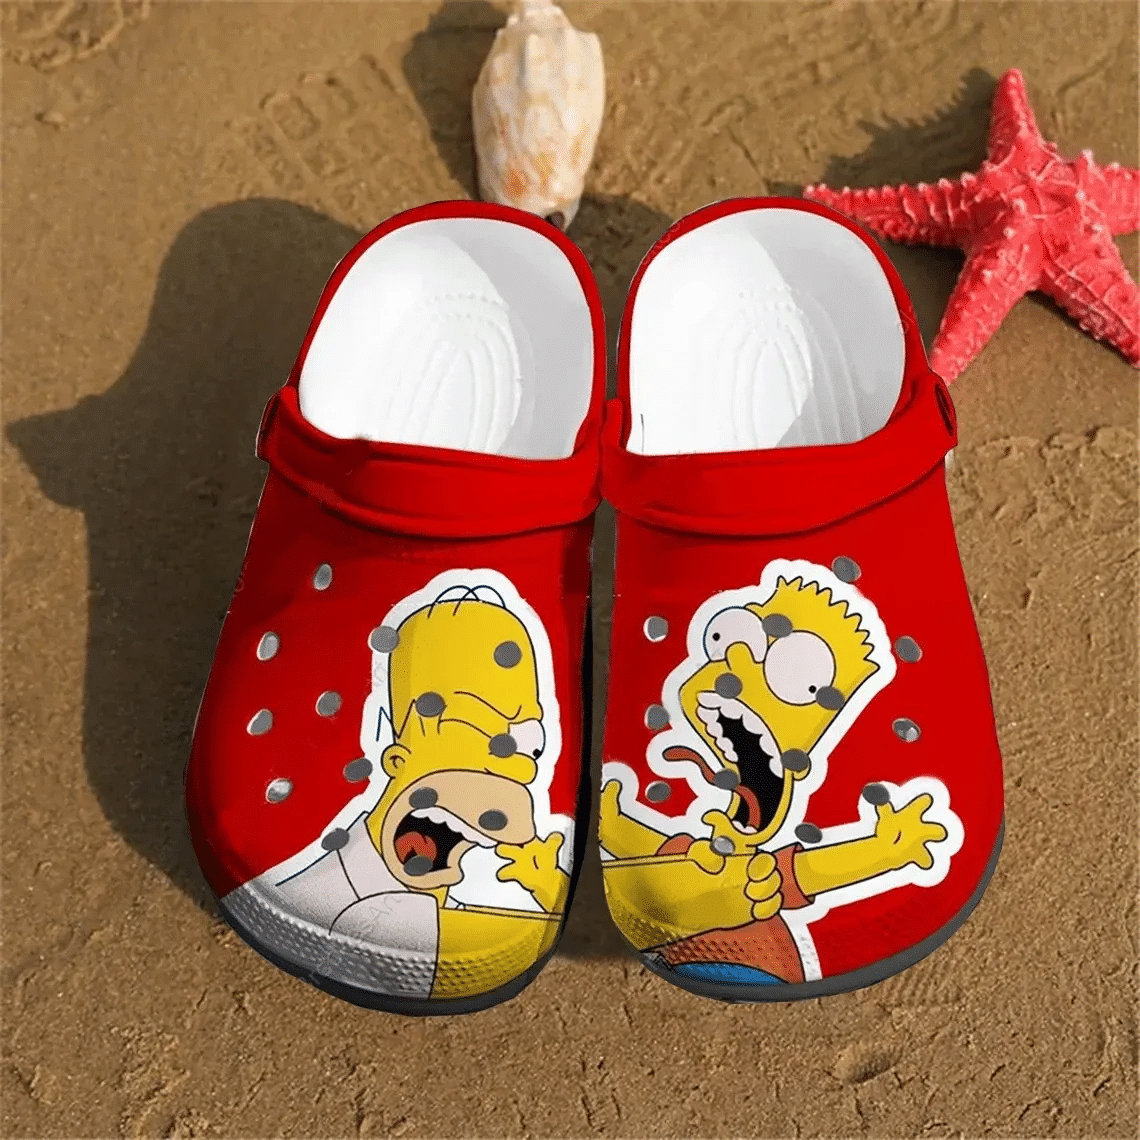 Funny The Simpsons Cartoon Crocss Crocband Clog Comfortable Water Shoes In Red For Men Women Kids